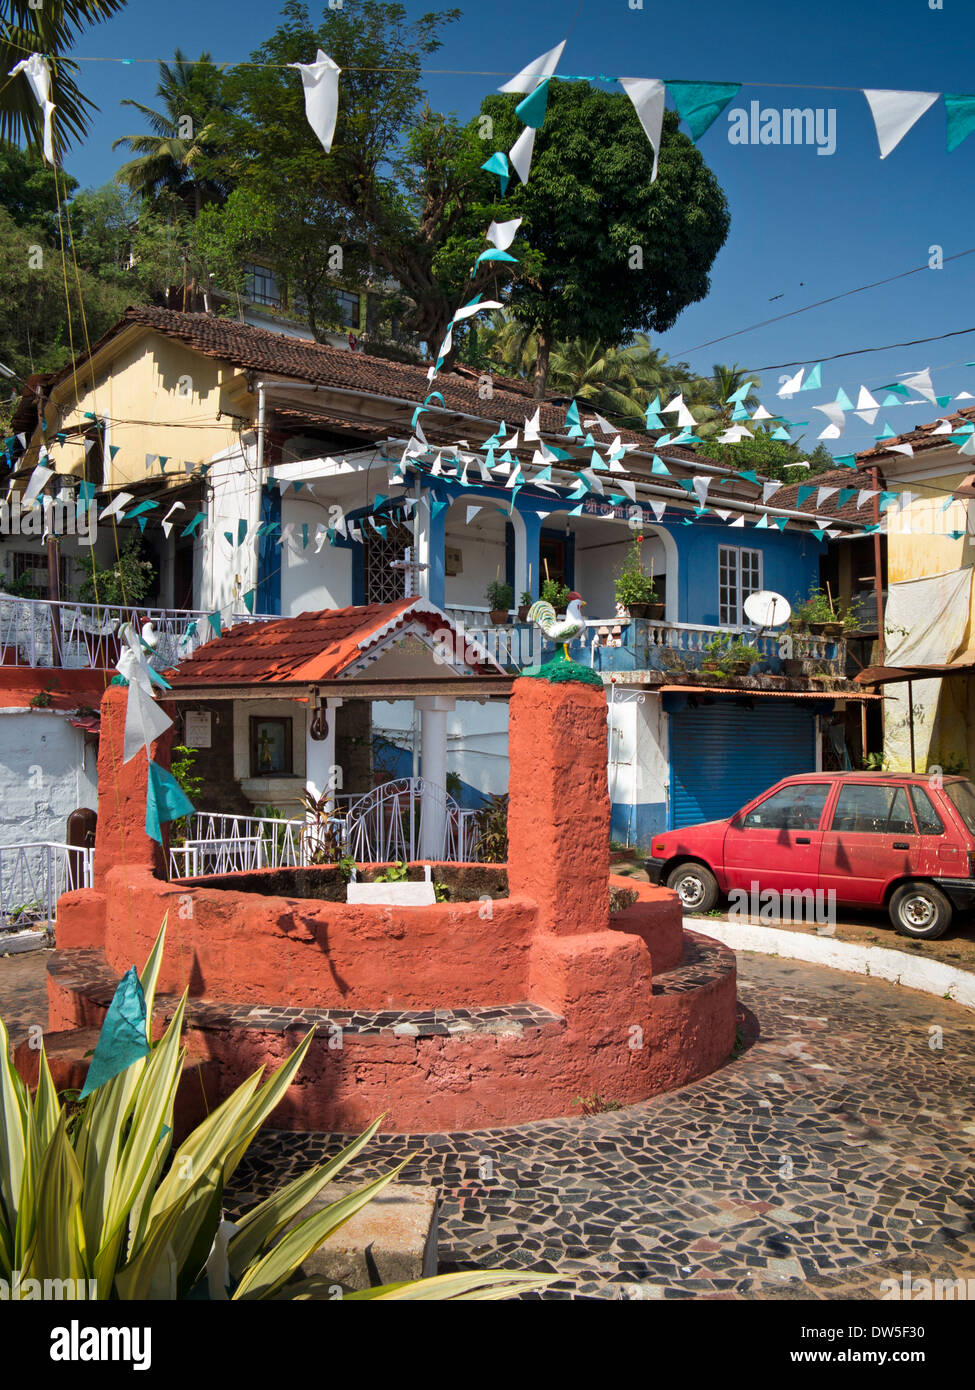 India, Goa, Panjim, Fontainhas, Portuguese Latin Quarter, old water supply, painted well Stock Photo